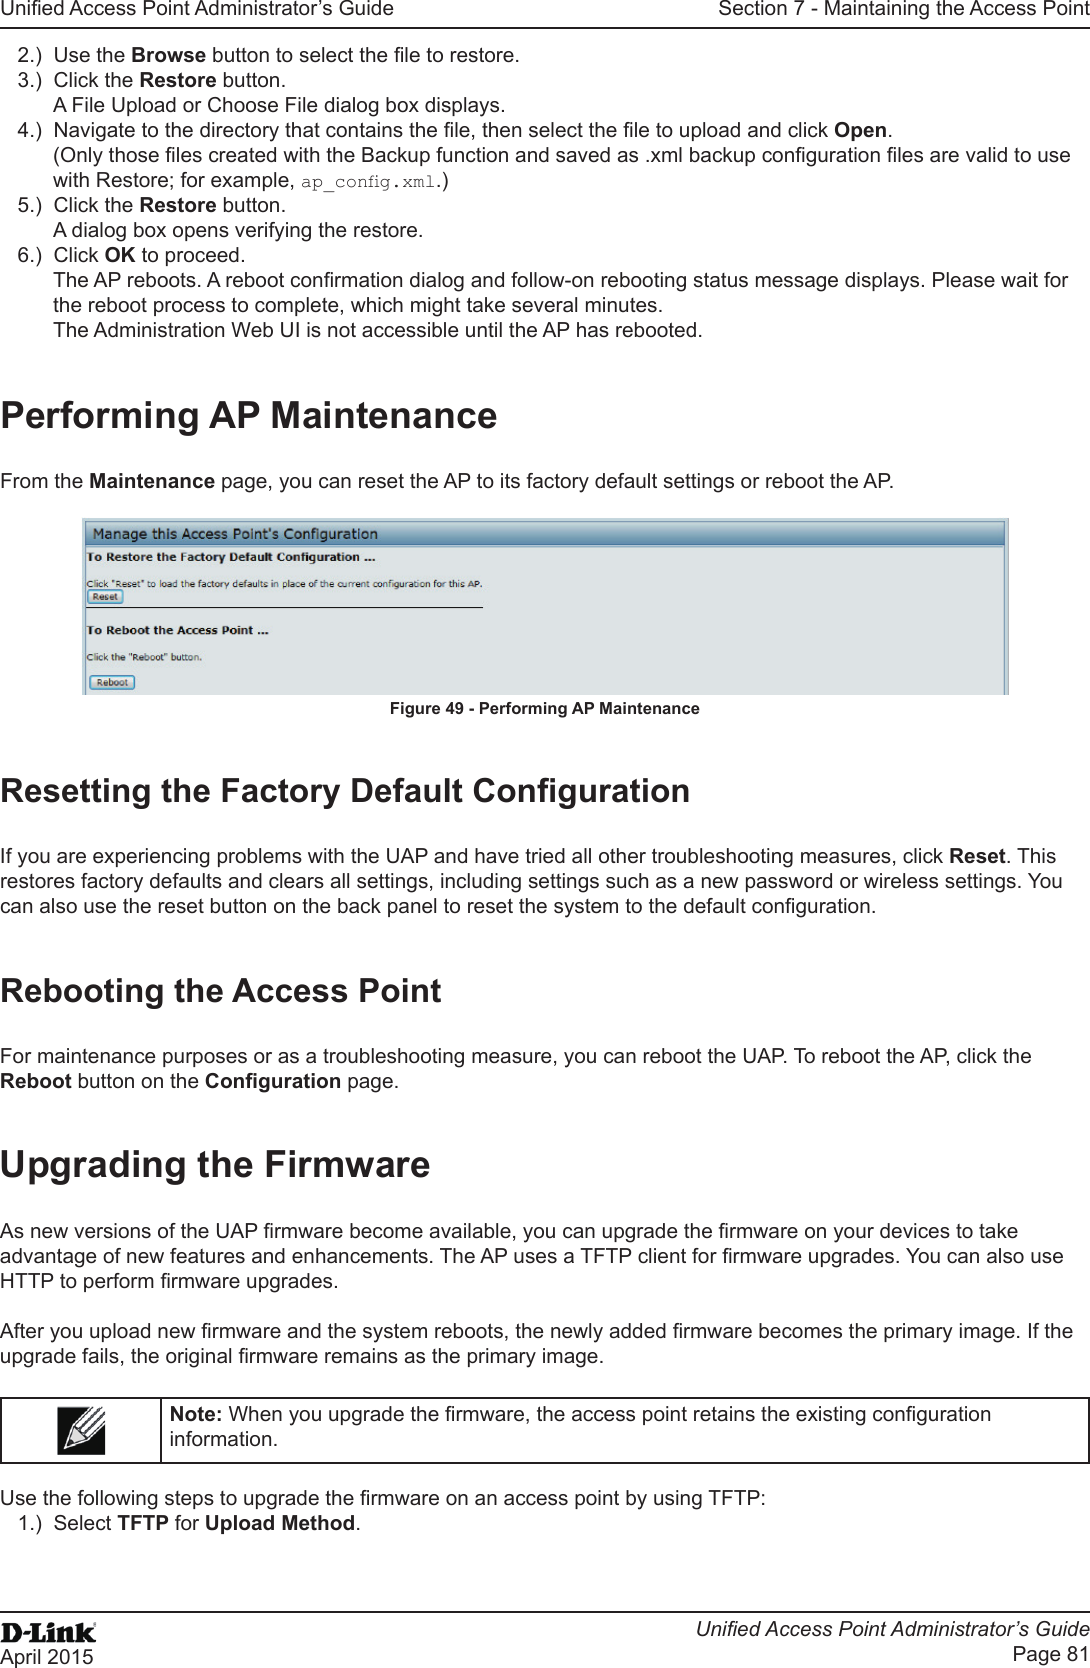 Unied Access Point Administrator’s GuideUnied Access Point Administrator’s GuidePage 81April 2015Section 7 - Maintaining the Access Point2.)  Use the Browse button to select the le to restore.3.)  Click the Restore button.A File Upload or Choose File dialog box displays.4.)  Navigate to the directory that contains the le, then select the le to upload and click Open.(Only those les created with the Backup function and saved as .xml backup conguration les are valid to use with Restore; for example, ap_cong.xml.)5.)  Click the Restore button.A dialog box opens verifying the restore.6.)  Click OK to proceed.The AP reboots. A reboot conrmation dialog and follow-on rebooting status message displays. Please wait for the reboot process to complete, which might take several minutes. The Administration Web UI is not accessible until the AP has rebooted.Performing AP MaintenanceFrom the Maintenance page, you can reset the AP to its factory default settings or reboot the AP.Figure 49 - Performing AP MaintenanceResetting the Factory Default CongurationIf you are experiencing problems with the UAP and have tried all other troubleshooting measures, click Reset. This restores factory defaults and clears all settings, including settings such as a new password or wireless settings. You can also use the reset button on the back panel to reset the system to the default conguration.Rebooting the Access PointFor maintenance purposes or as a troubleshooting measure, you can reboot the UAP. To reboot the AP, click the Reboot button on the Conguration page.Upgrading the FirmwareAs new versions of the UAP rmware become available, you can upgrade the rmware on your devices to take advantage of new features and enhancements. The AP uses a TFTP client for rmware upgrades. You can also use HTTP to perform rmware upgrades.After you upload new rmware and the system reboots, the newly added rmware becomes the primary image. If the upgrade fails, the original rmware remains as the primary image. Note: When you upgrade the rmware, the access point retains the existing conguration information.Use the following steps to upgrade the rmware on an access point by using TFTP:1.)  Select TFTP for Upload Method.